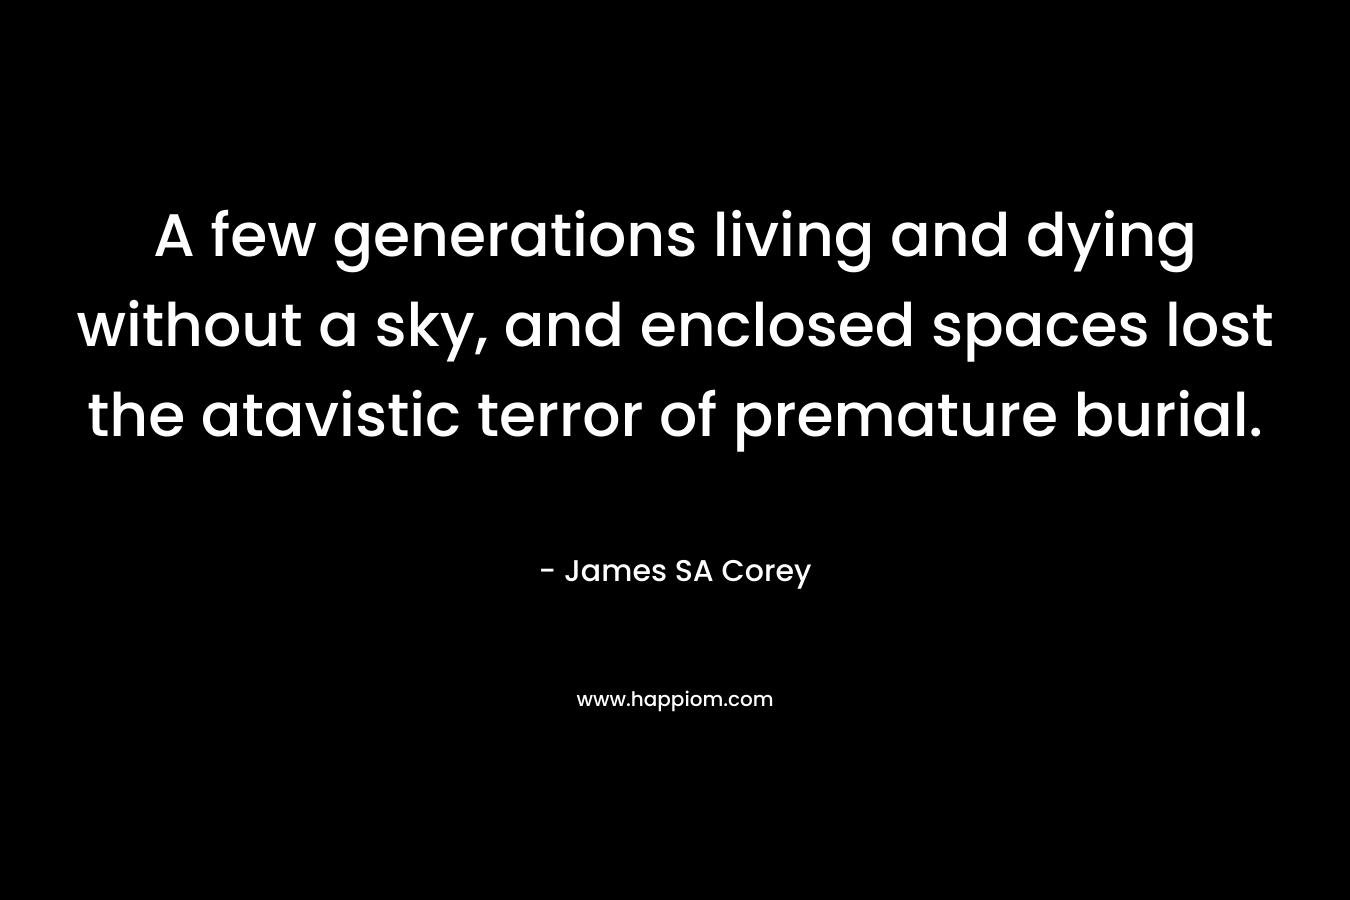 A few generations living and dying without a sky, and enclosed spaces lost the atavistic terror of premature burial. – James SA Corey